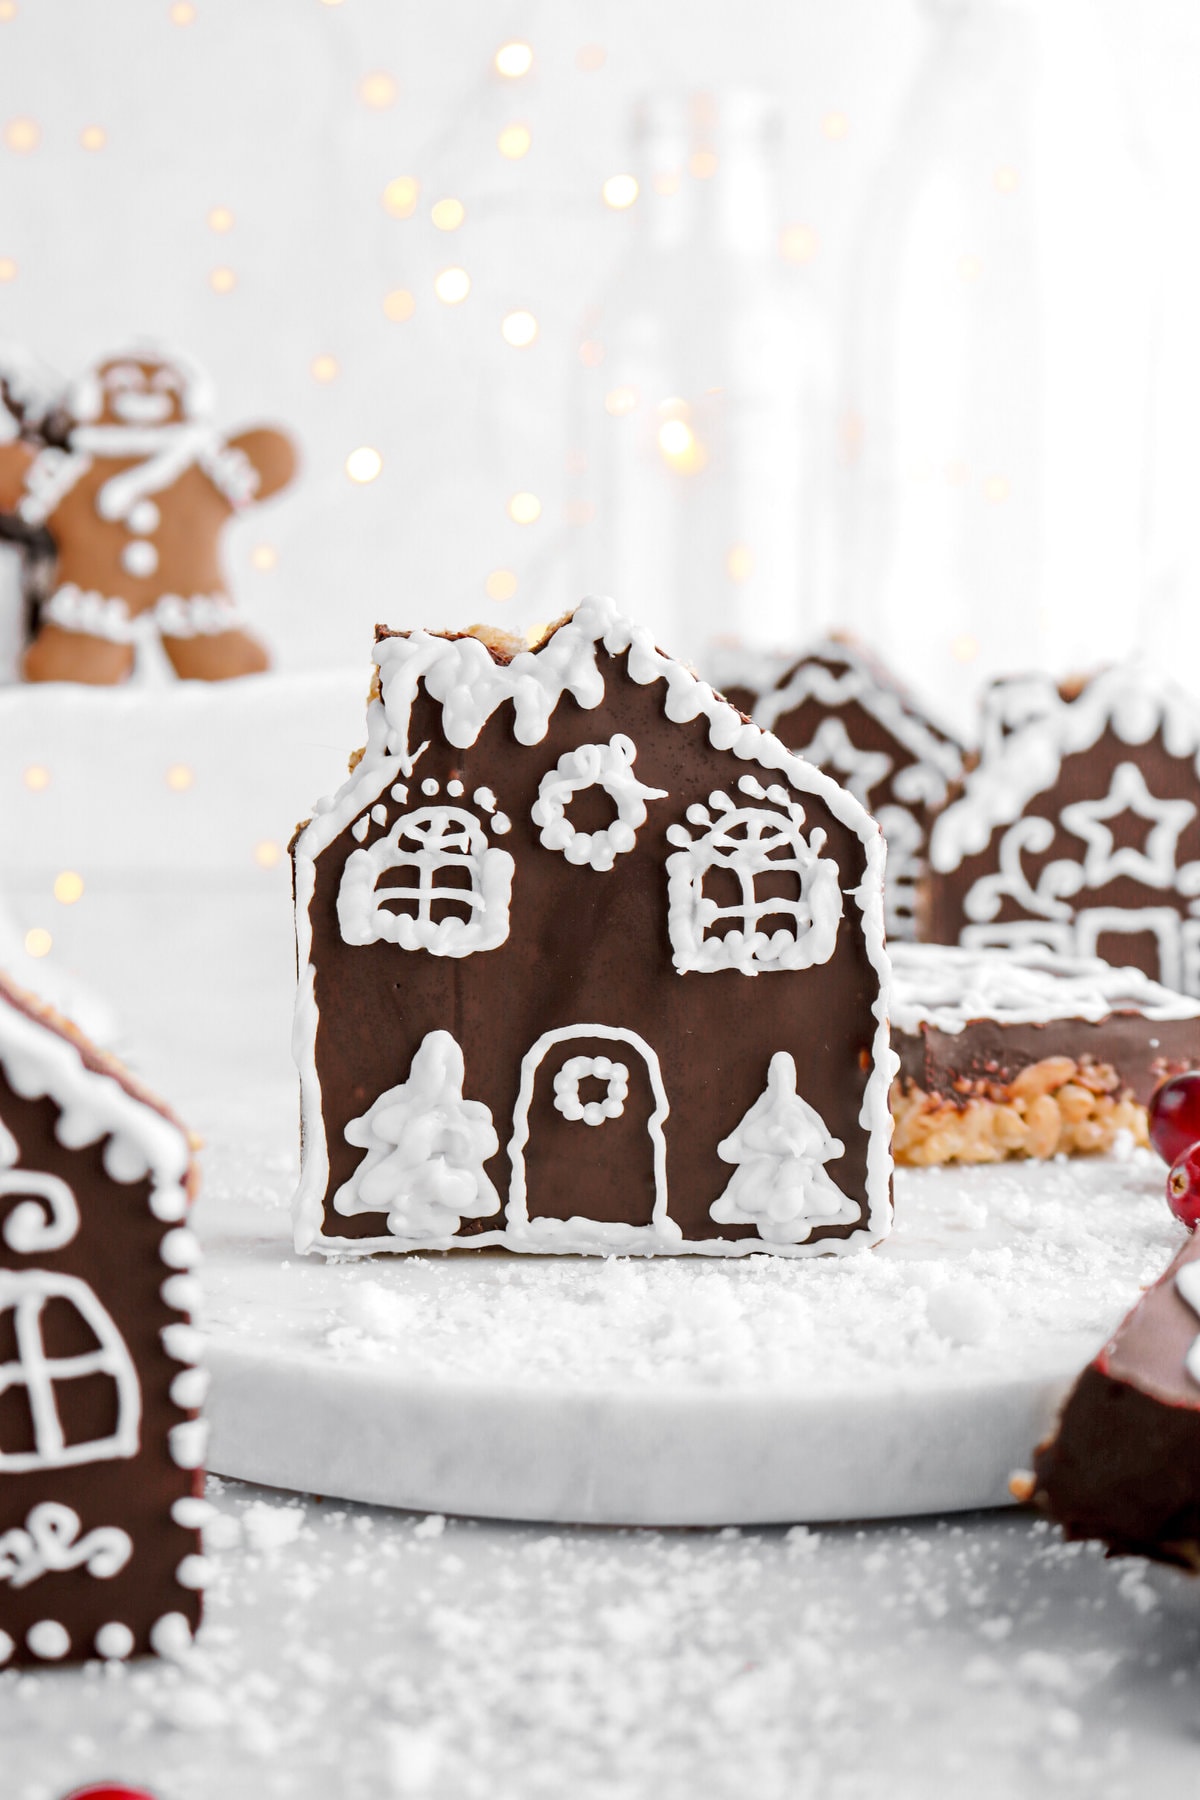 image of decorated gingerbread house rice krispie treat with fairy lights behind and more rice krispie treats around.